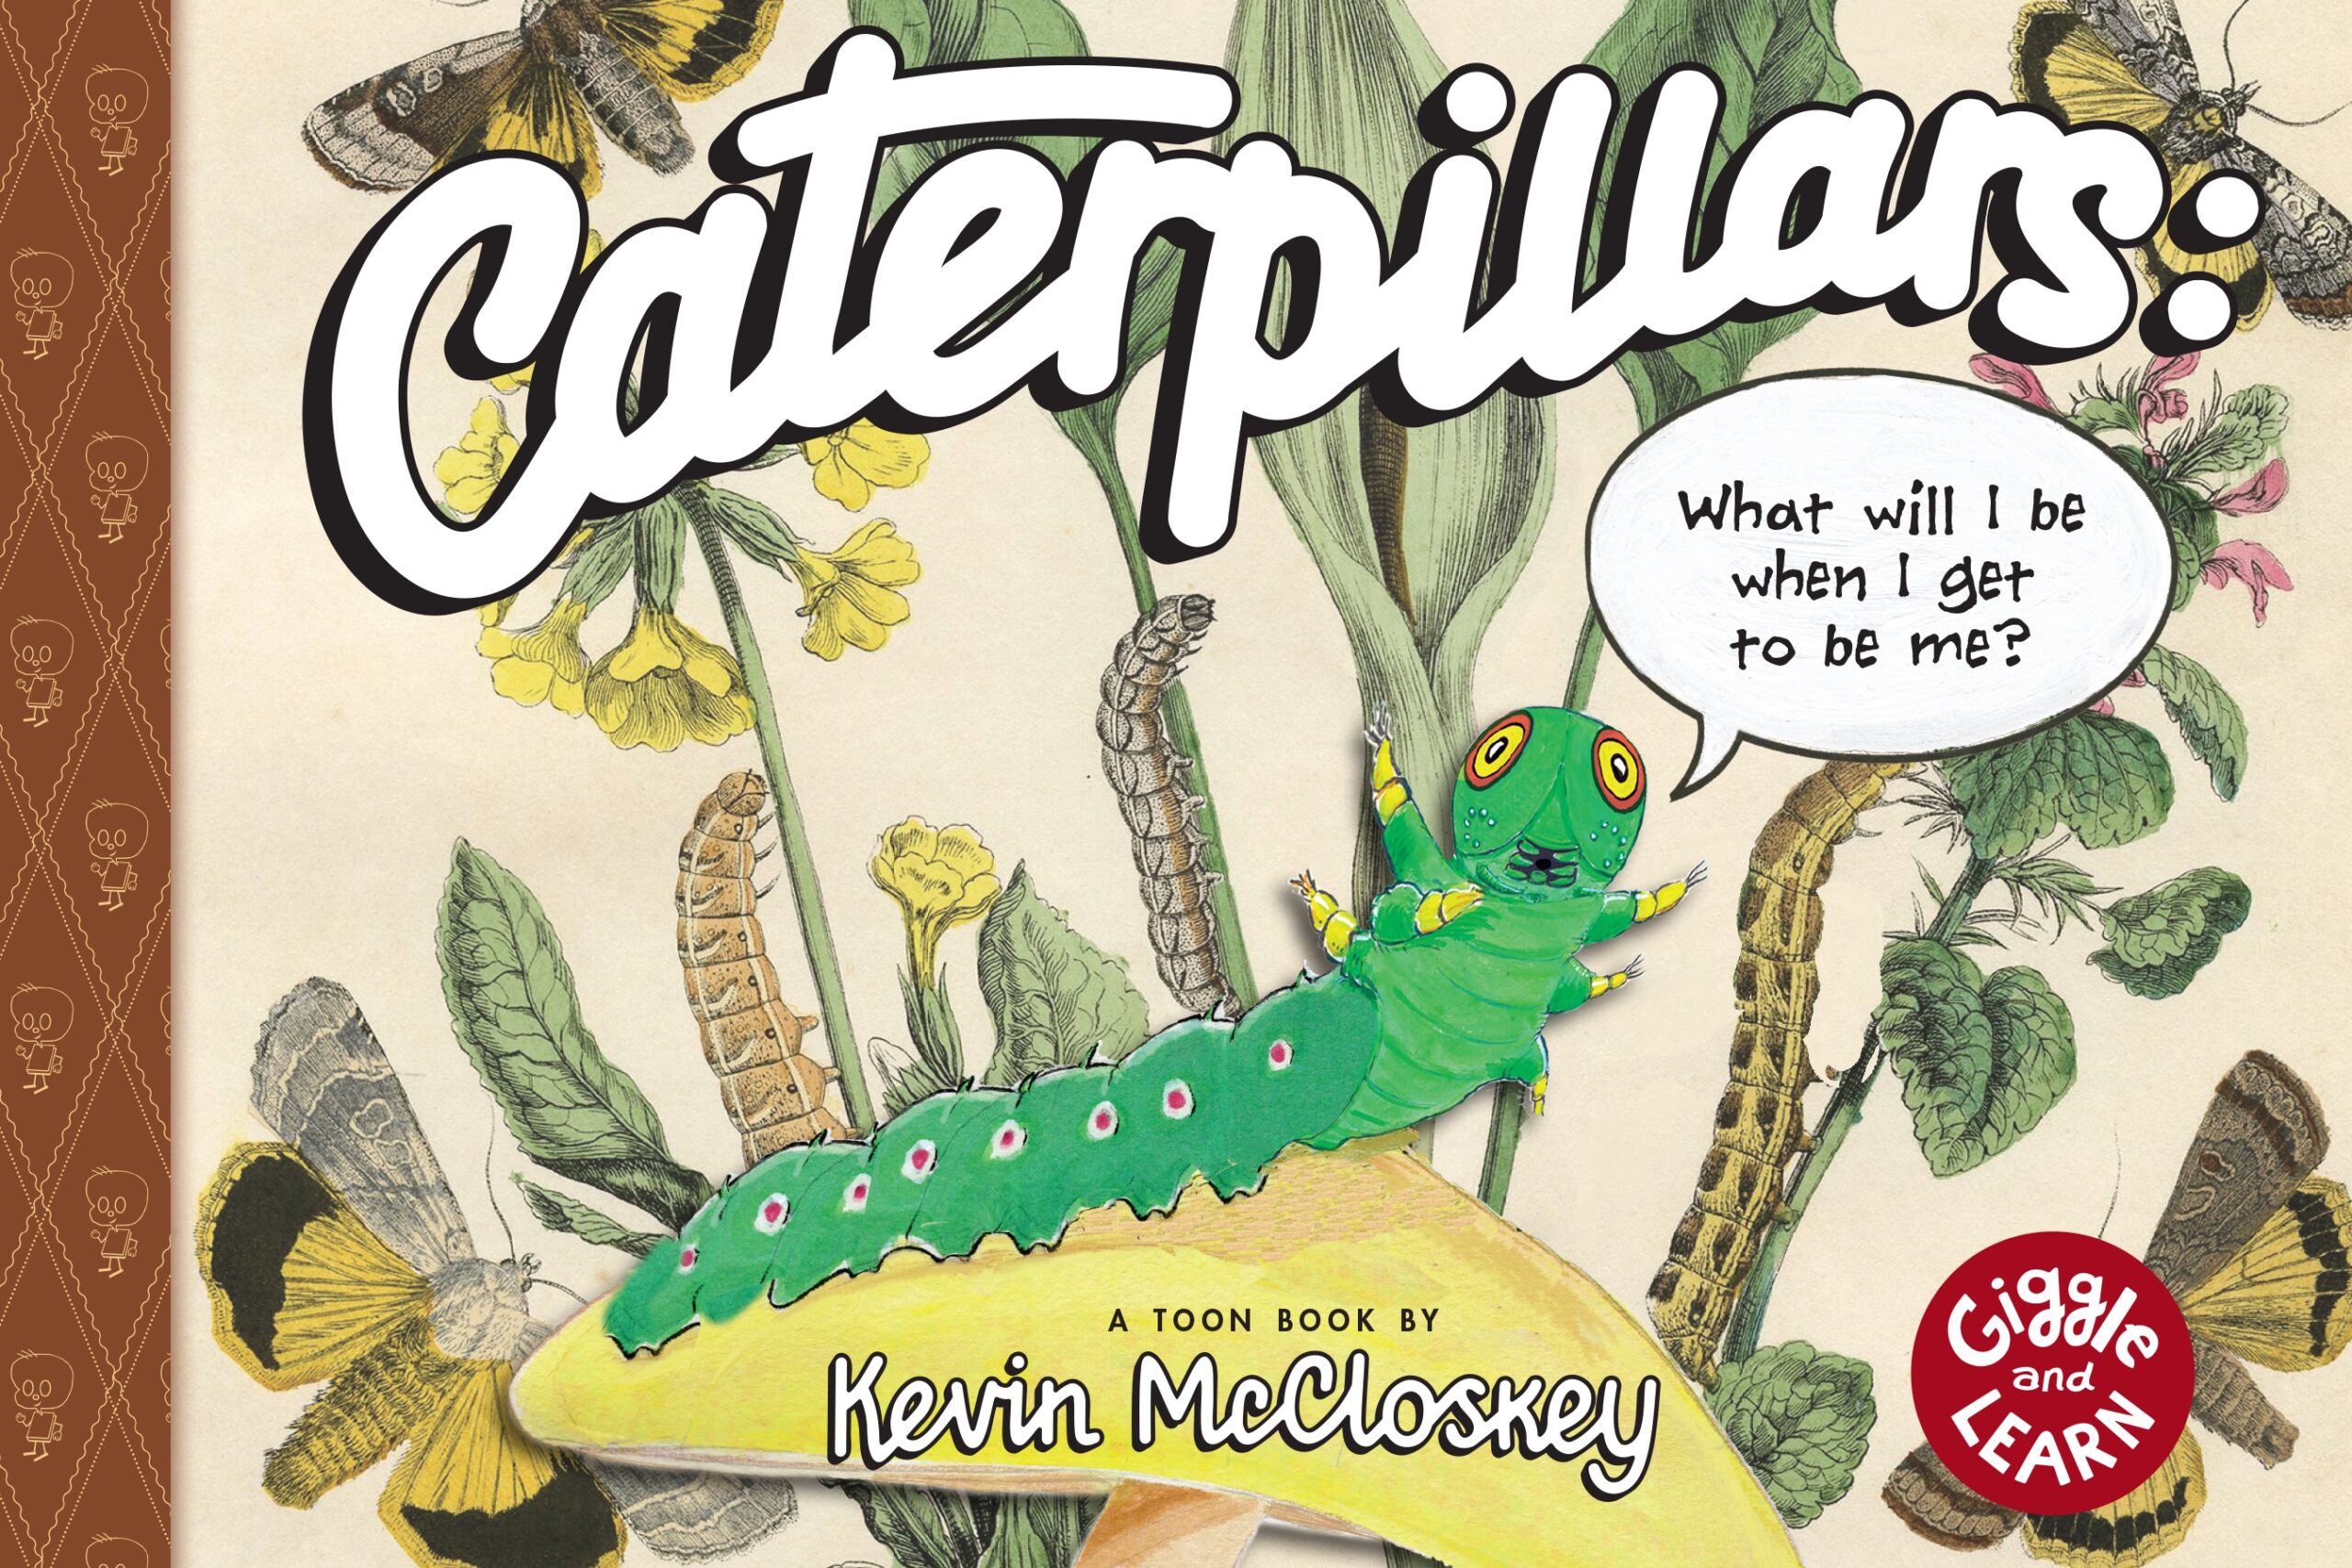 Caterpillars: What Will I Be When I Get to be Me? cover